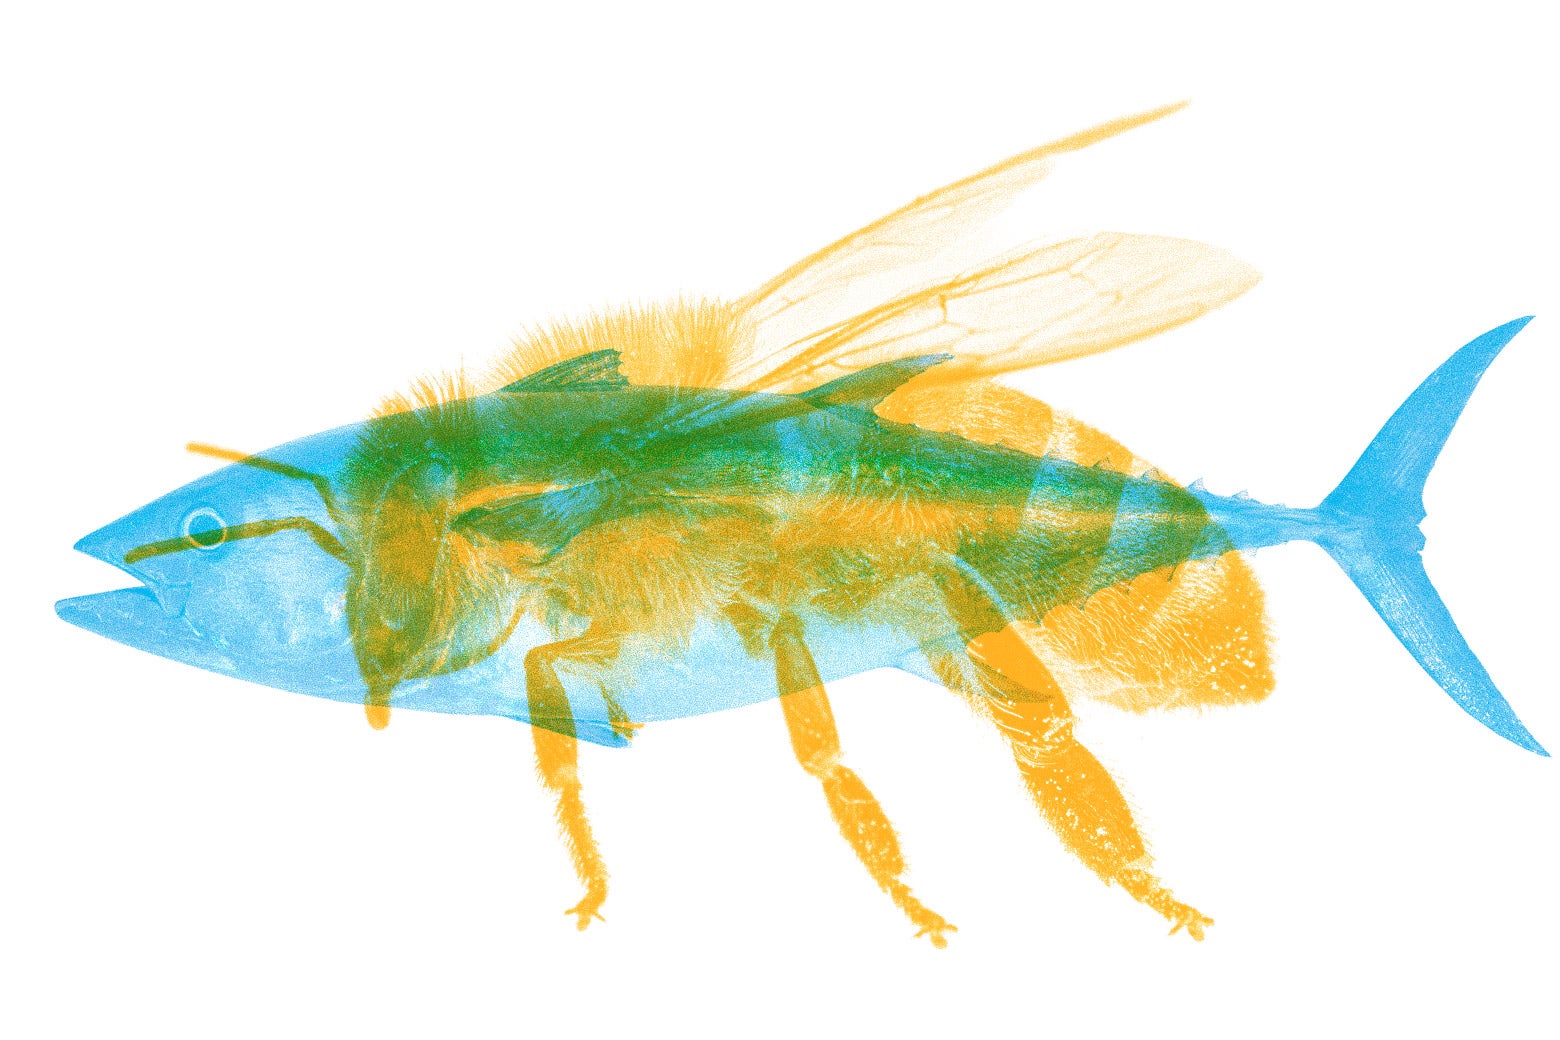 Bee image overlaid on top of a fish.